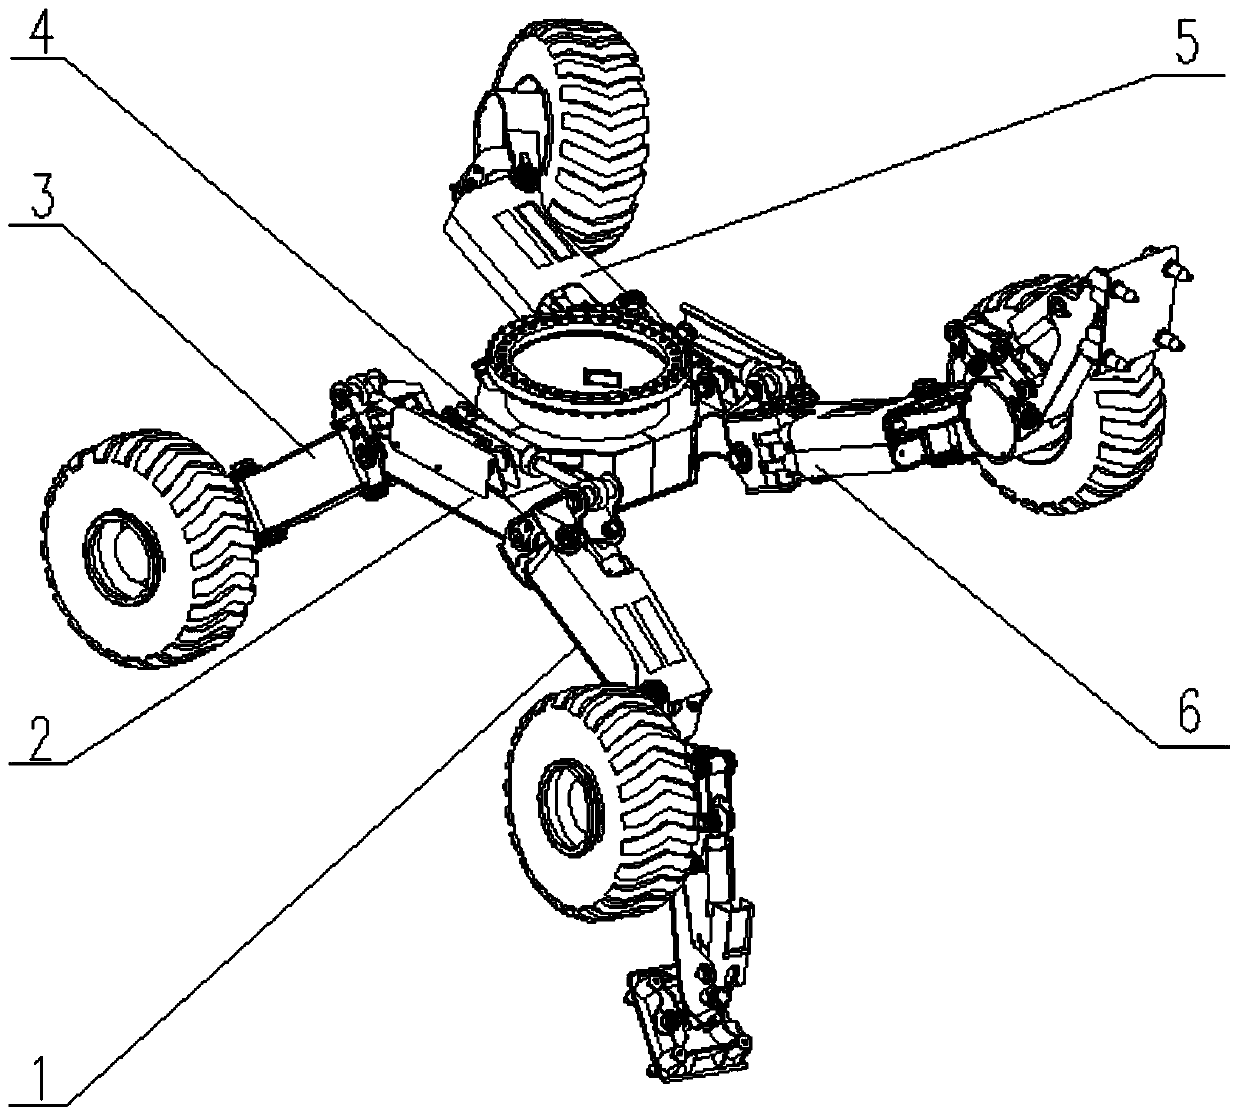 A symmetrical multi-degree-of-freedom four-wheel all-wheel-drive walking excavator walking chassis